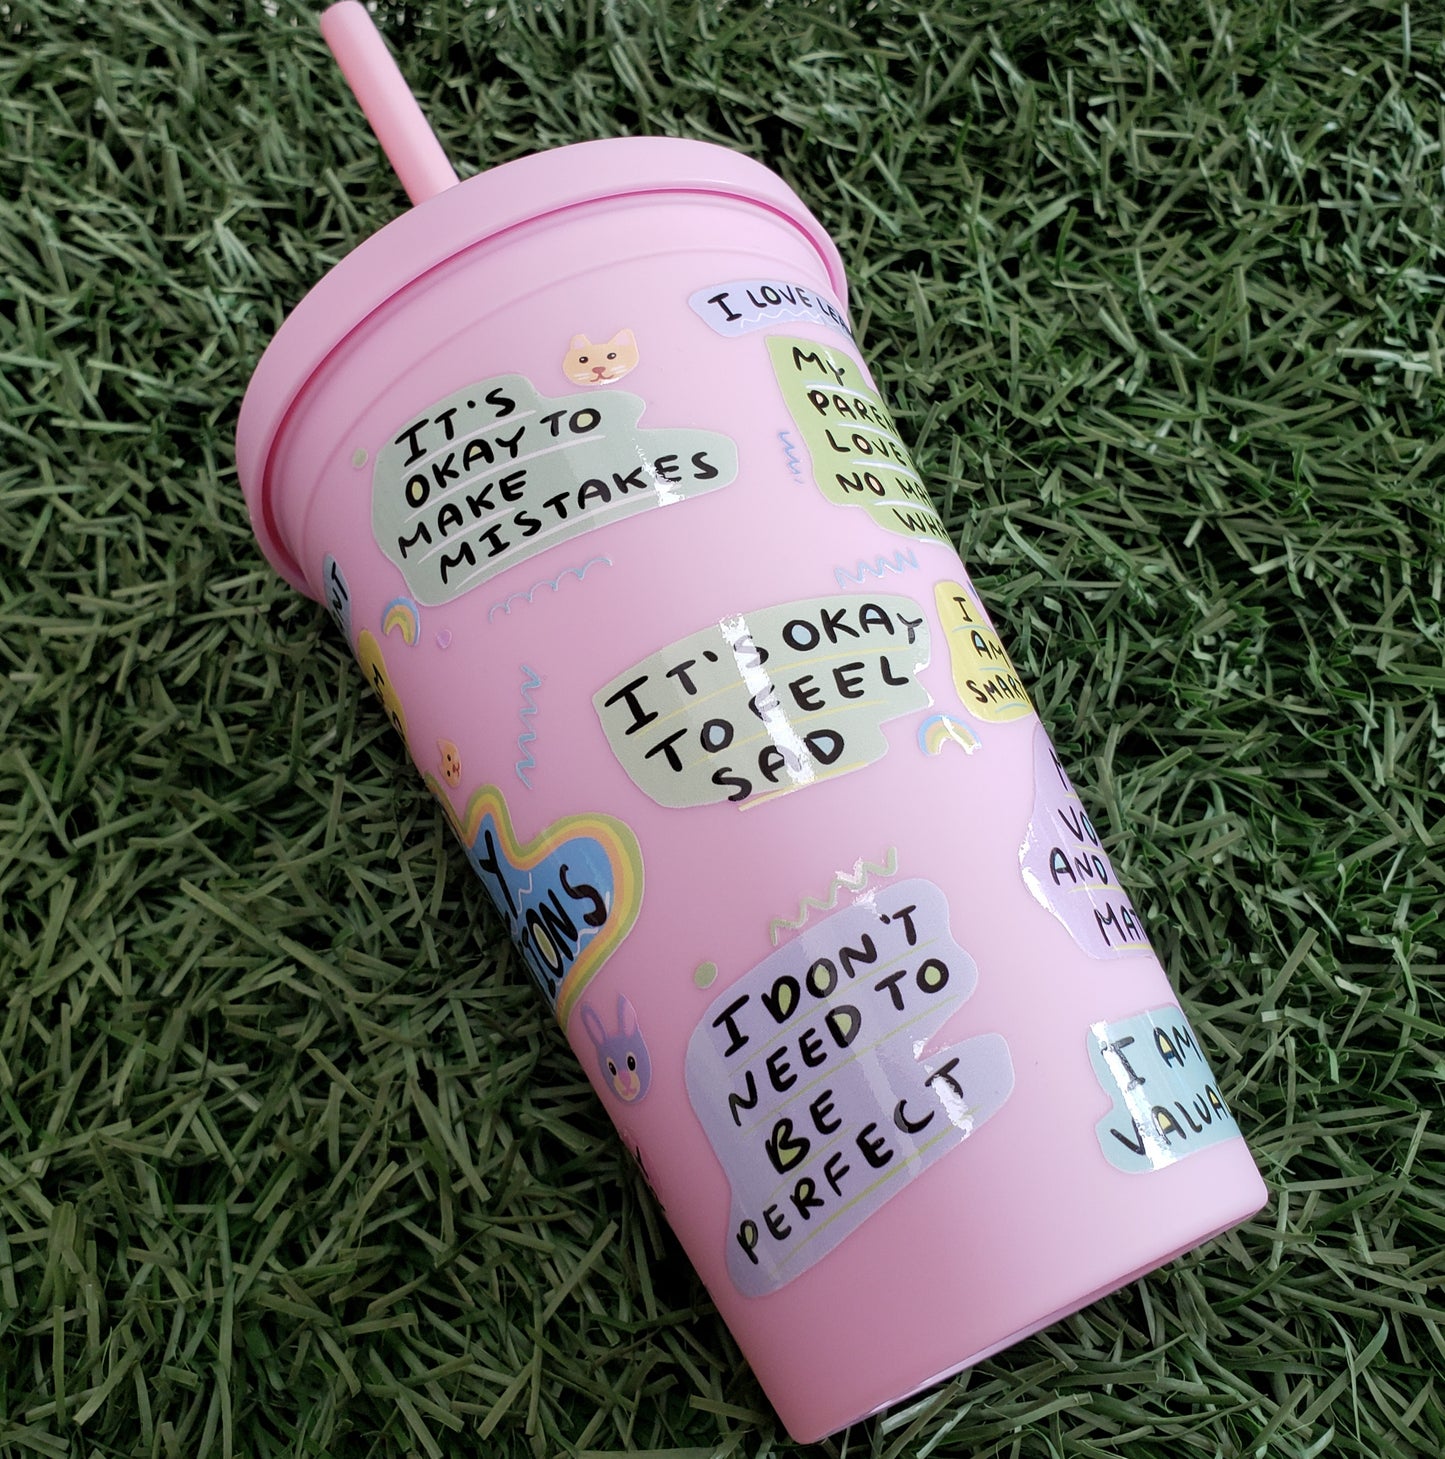 Kid Daily Affirmations - 16oz Pink or Blue Tumbler